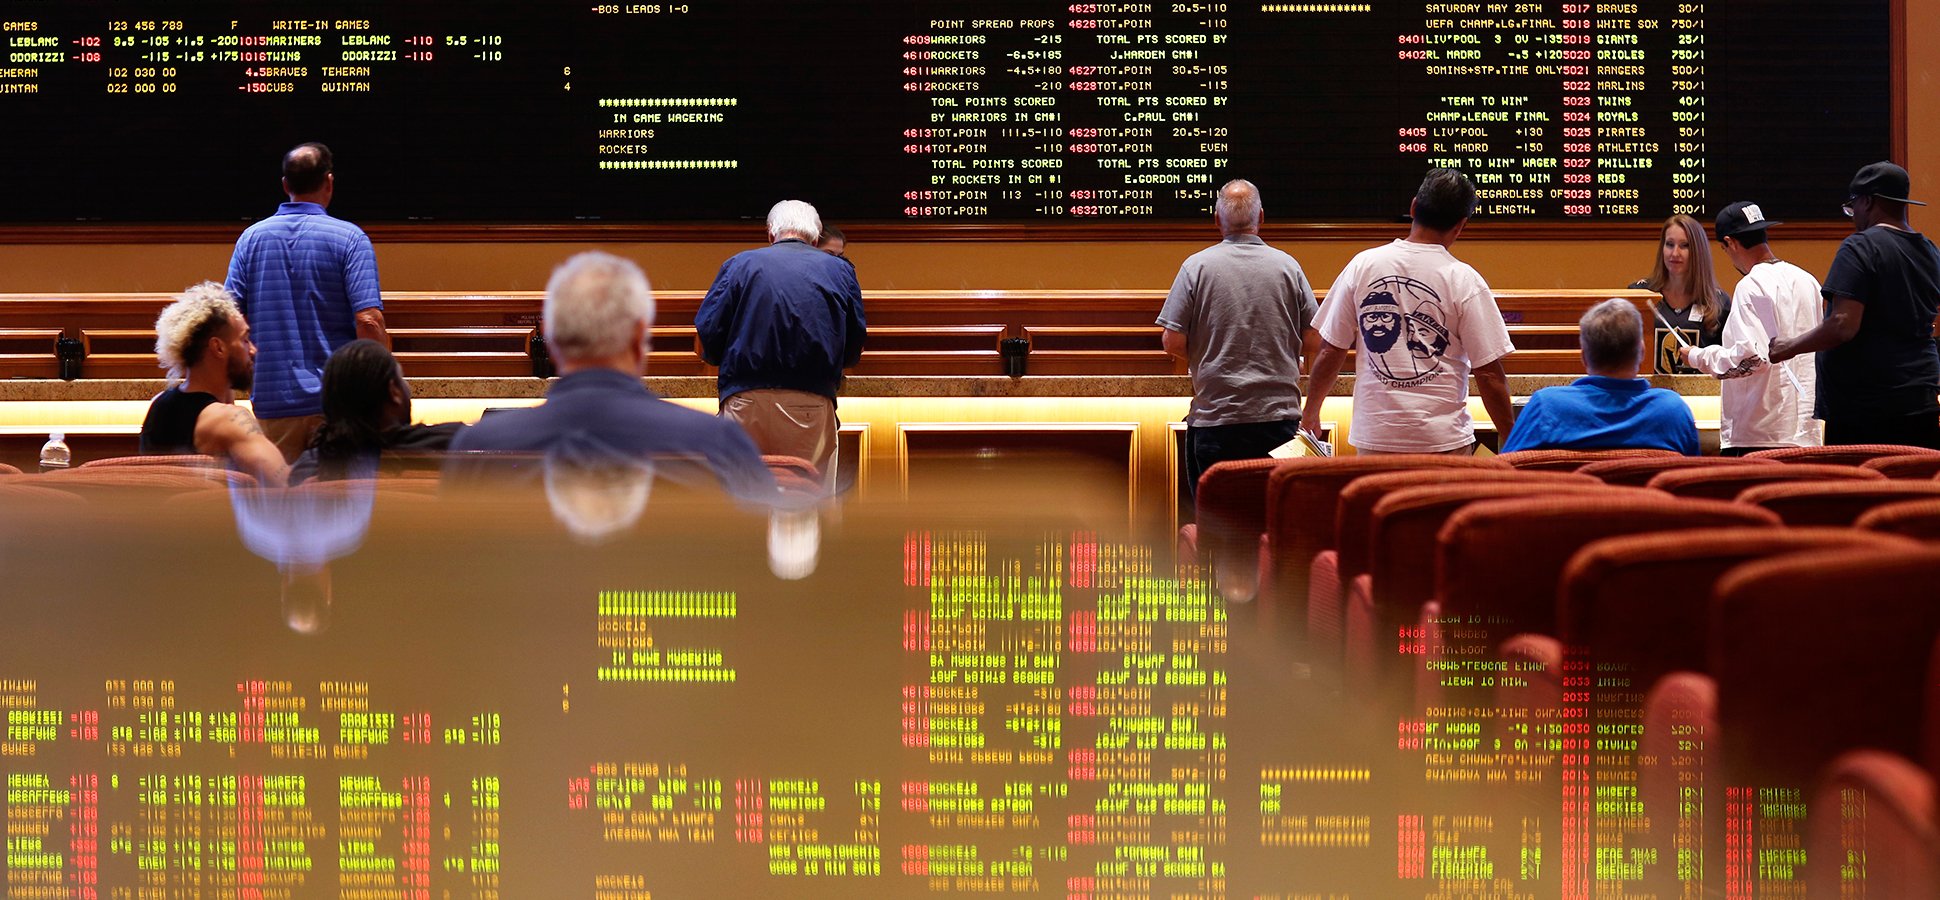 Investing your money in sports betting